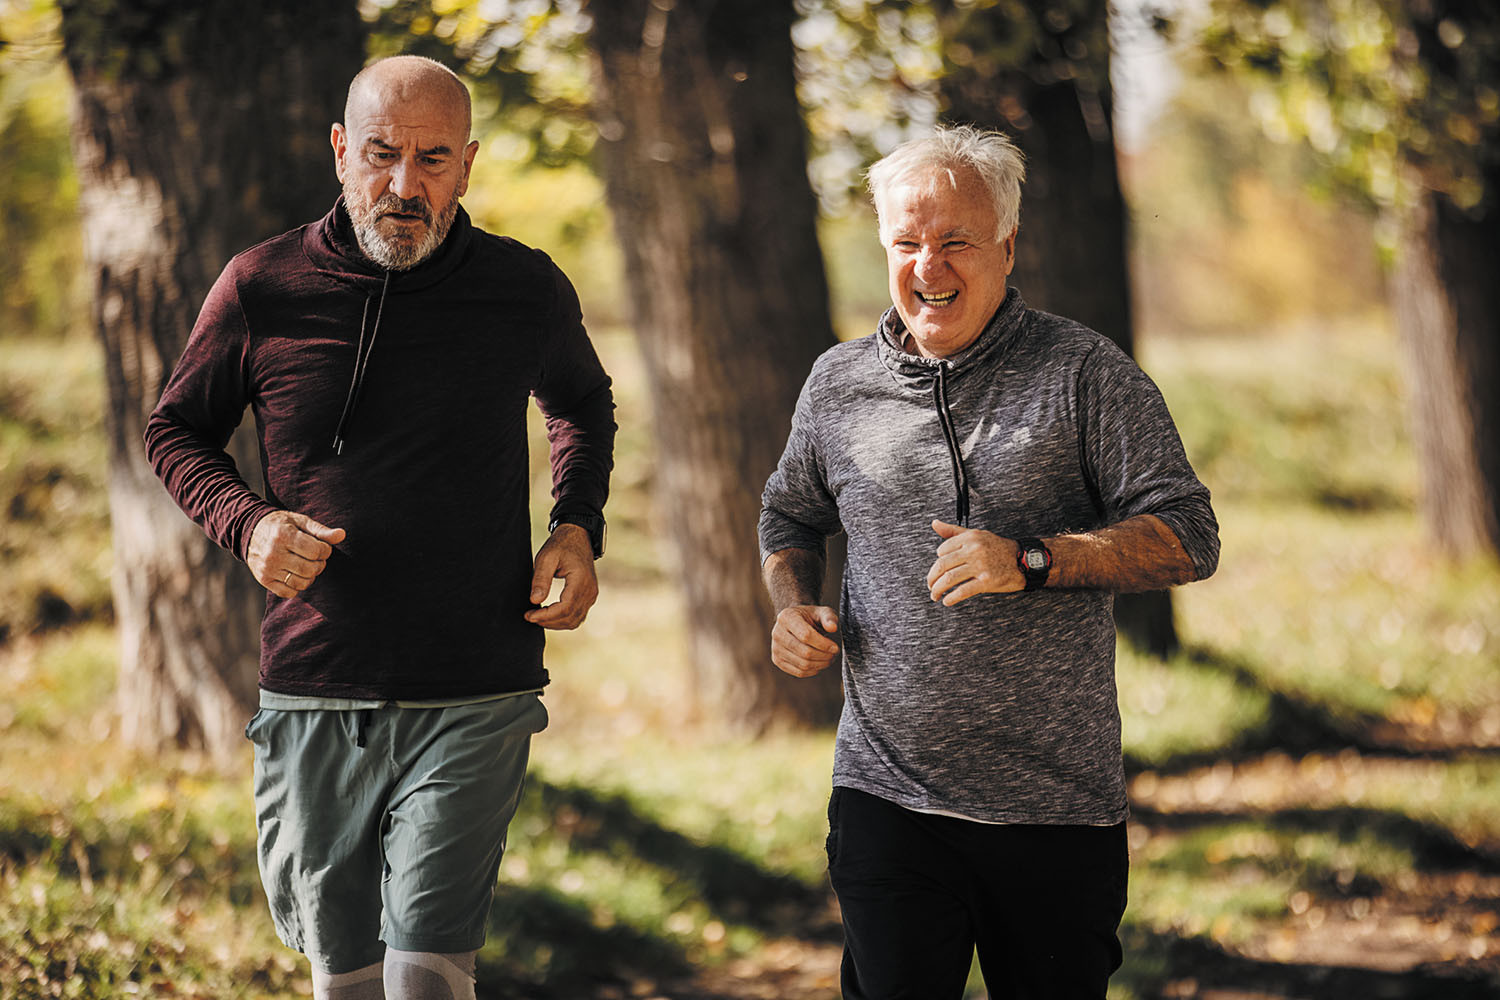 photo of two mature men jogging in a wooded area